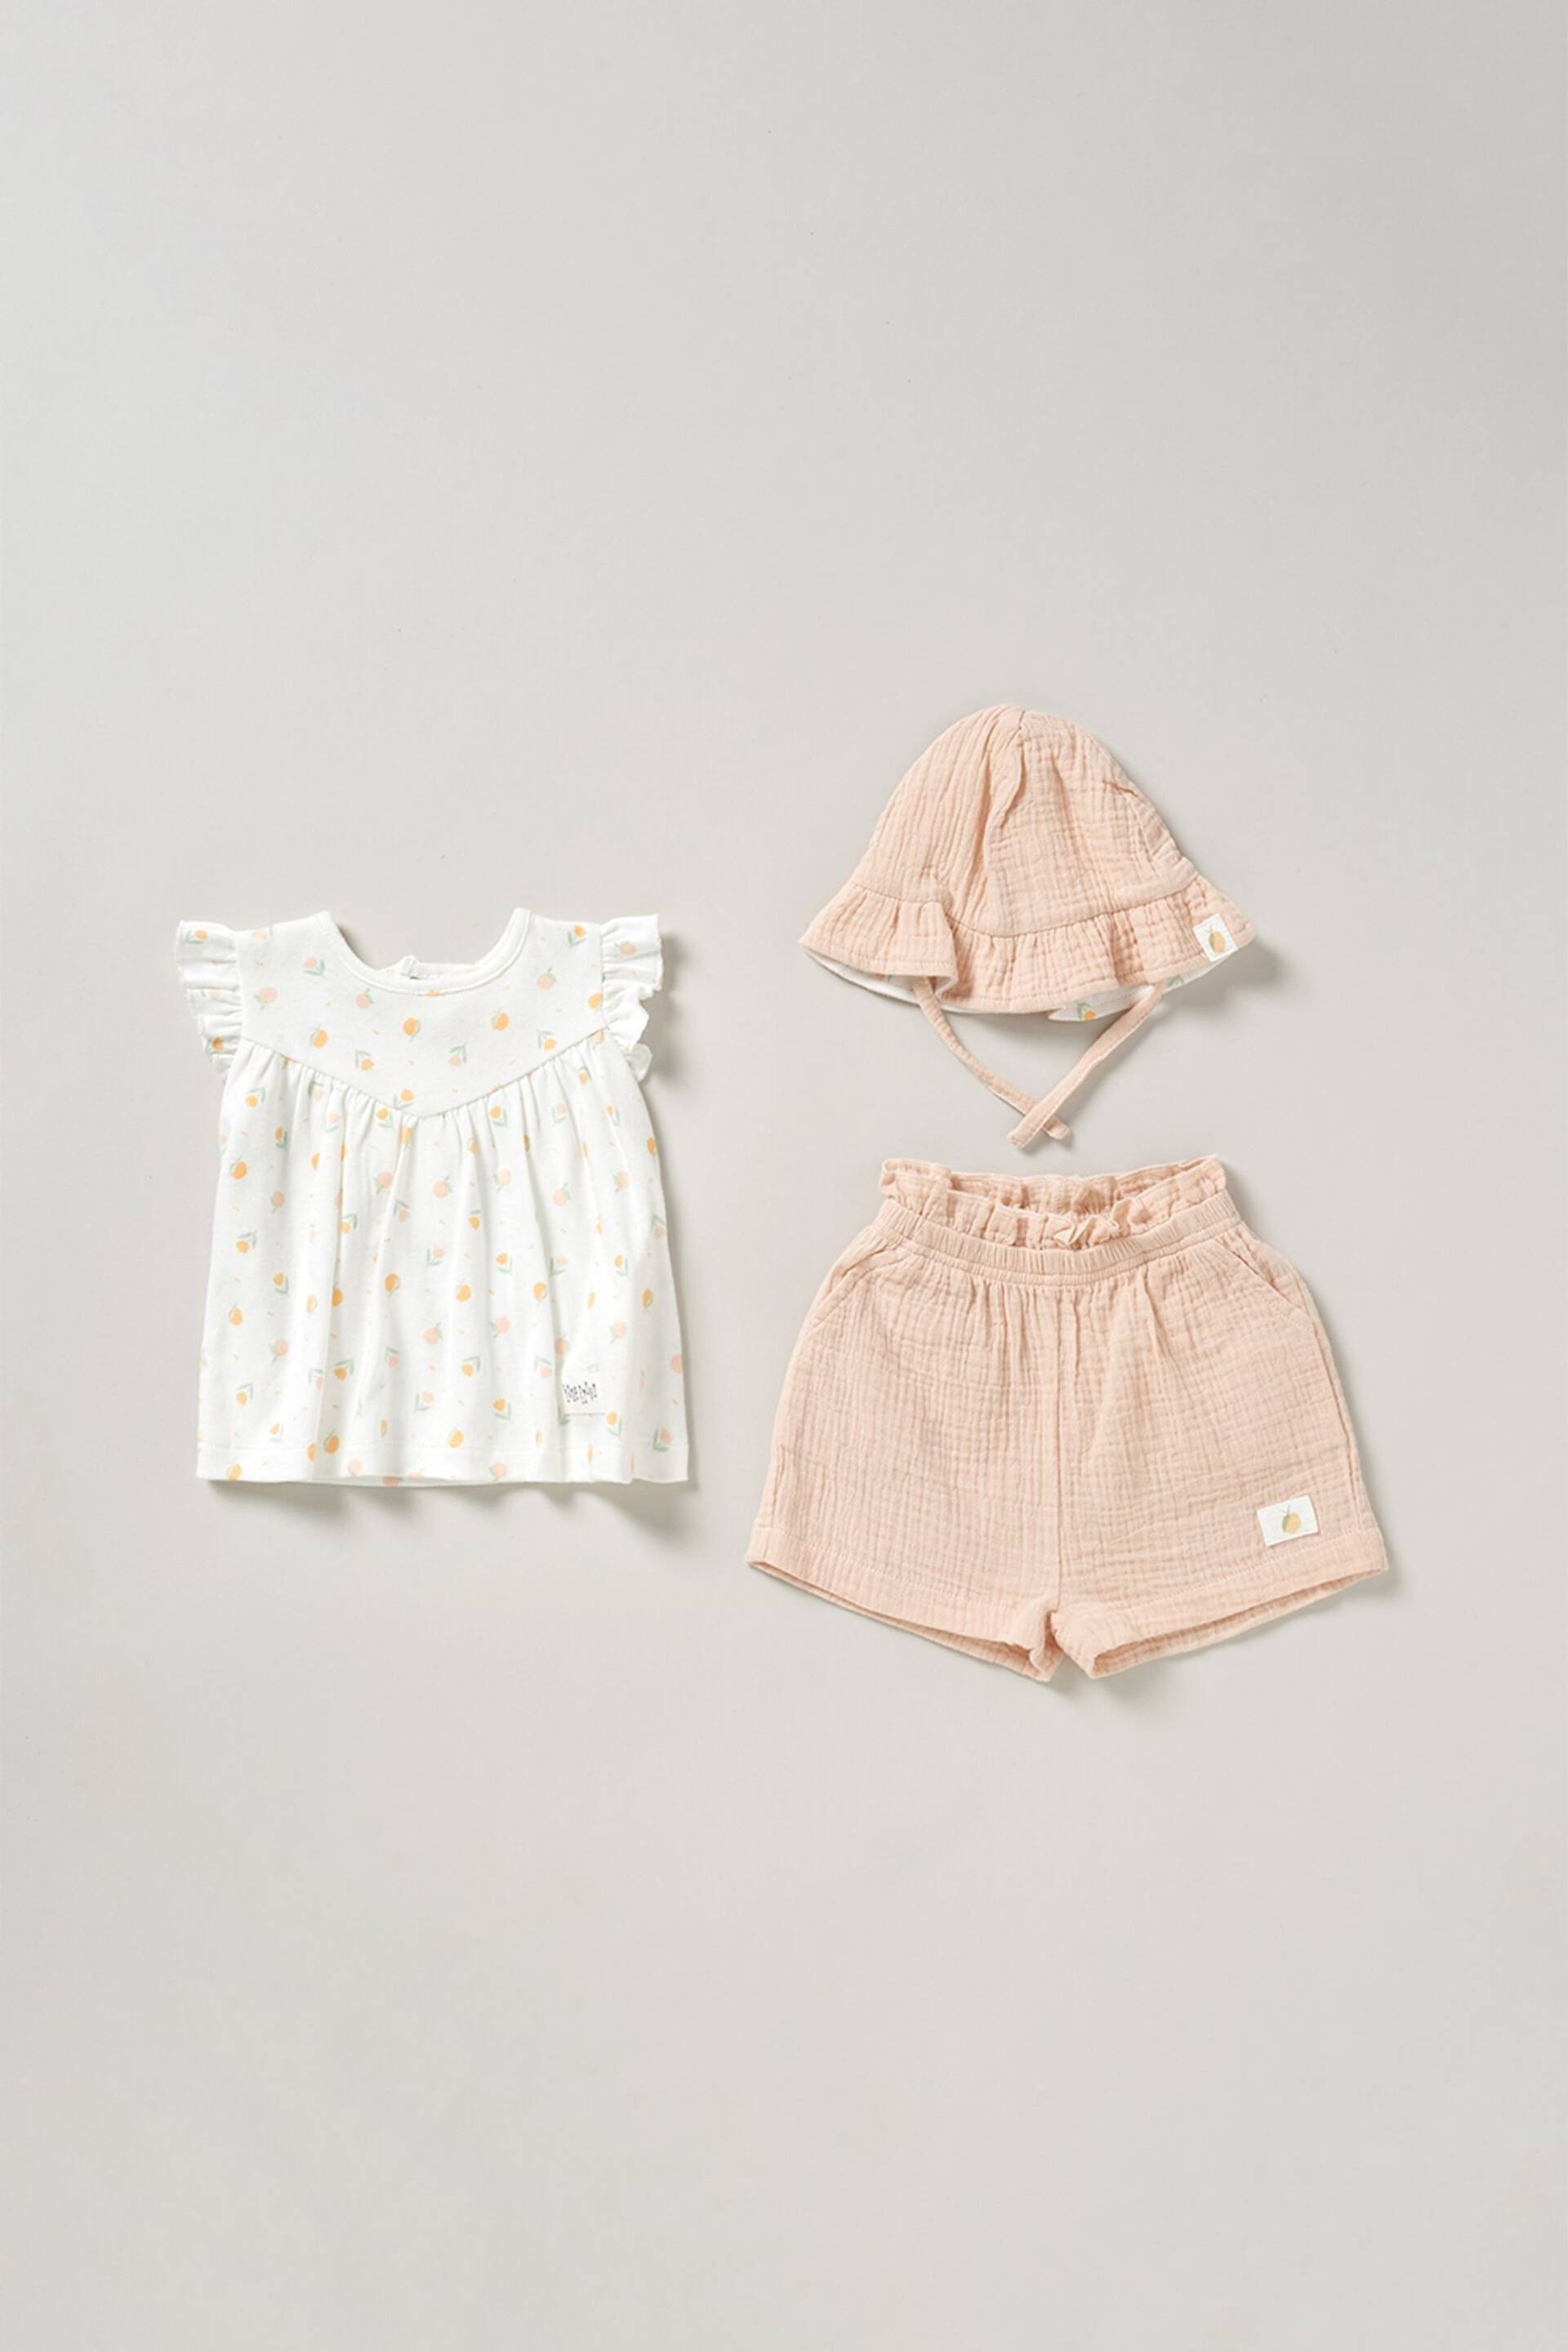 Homegrown Pink 3 Piece Top Shorts And Hat Set - Image 1 of 5